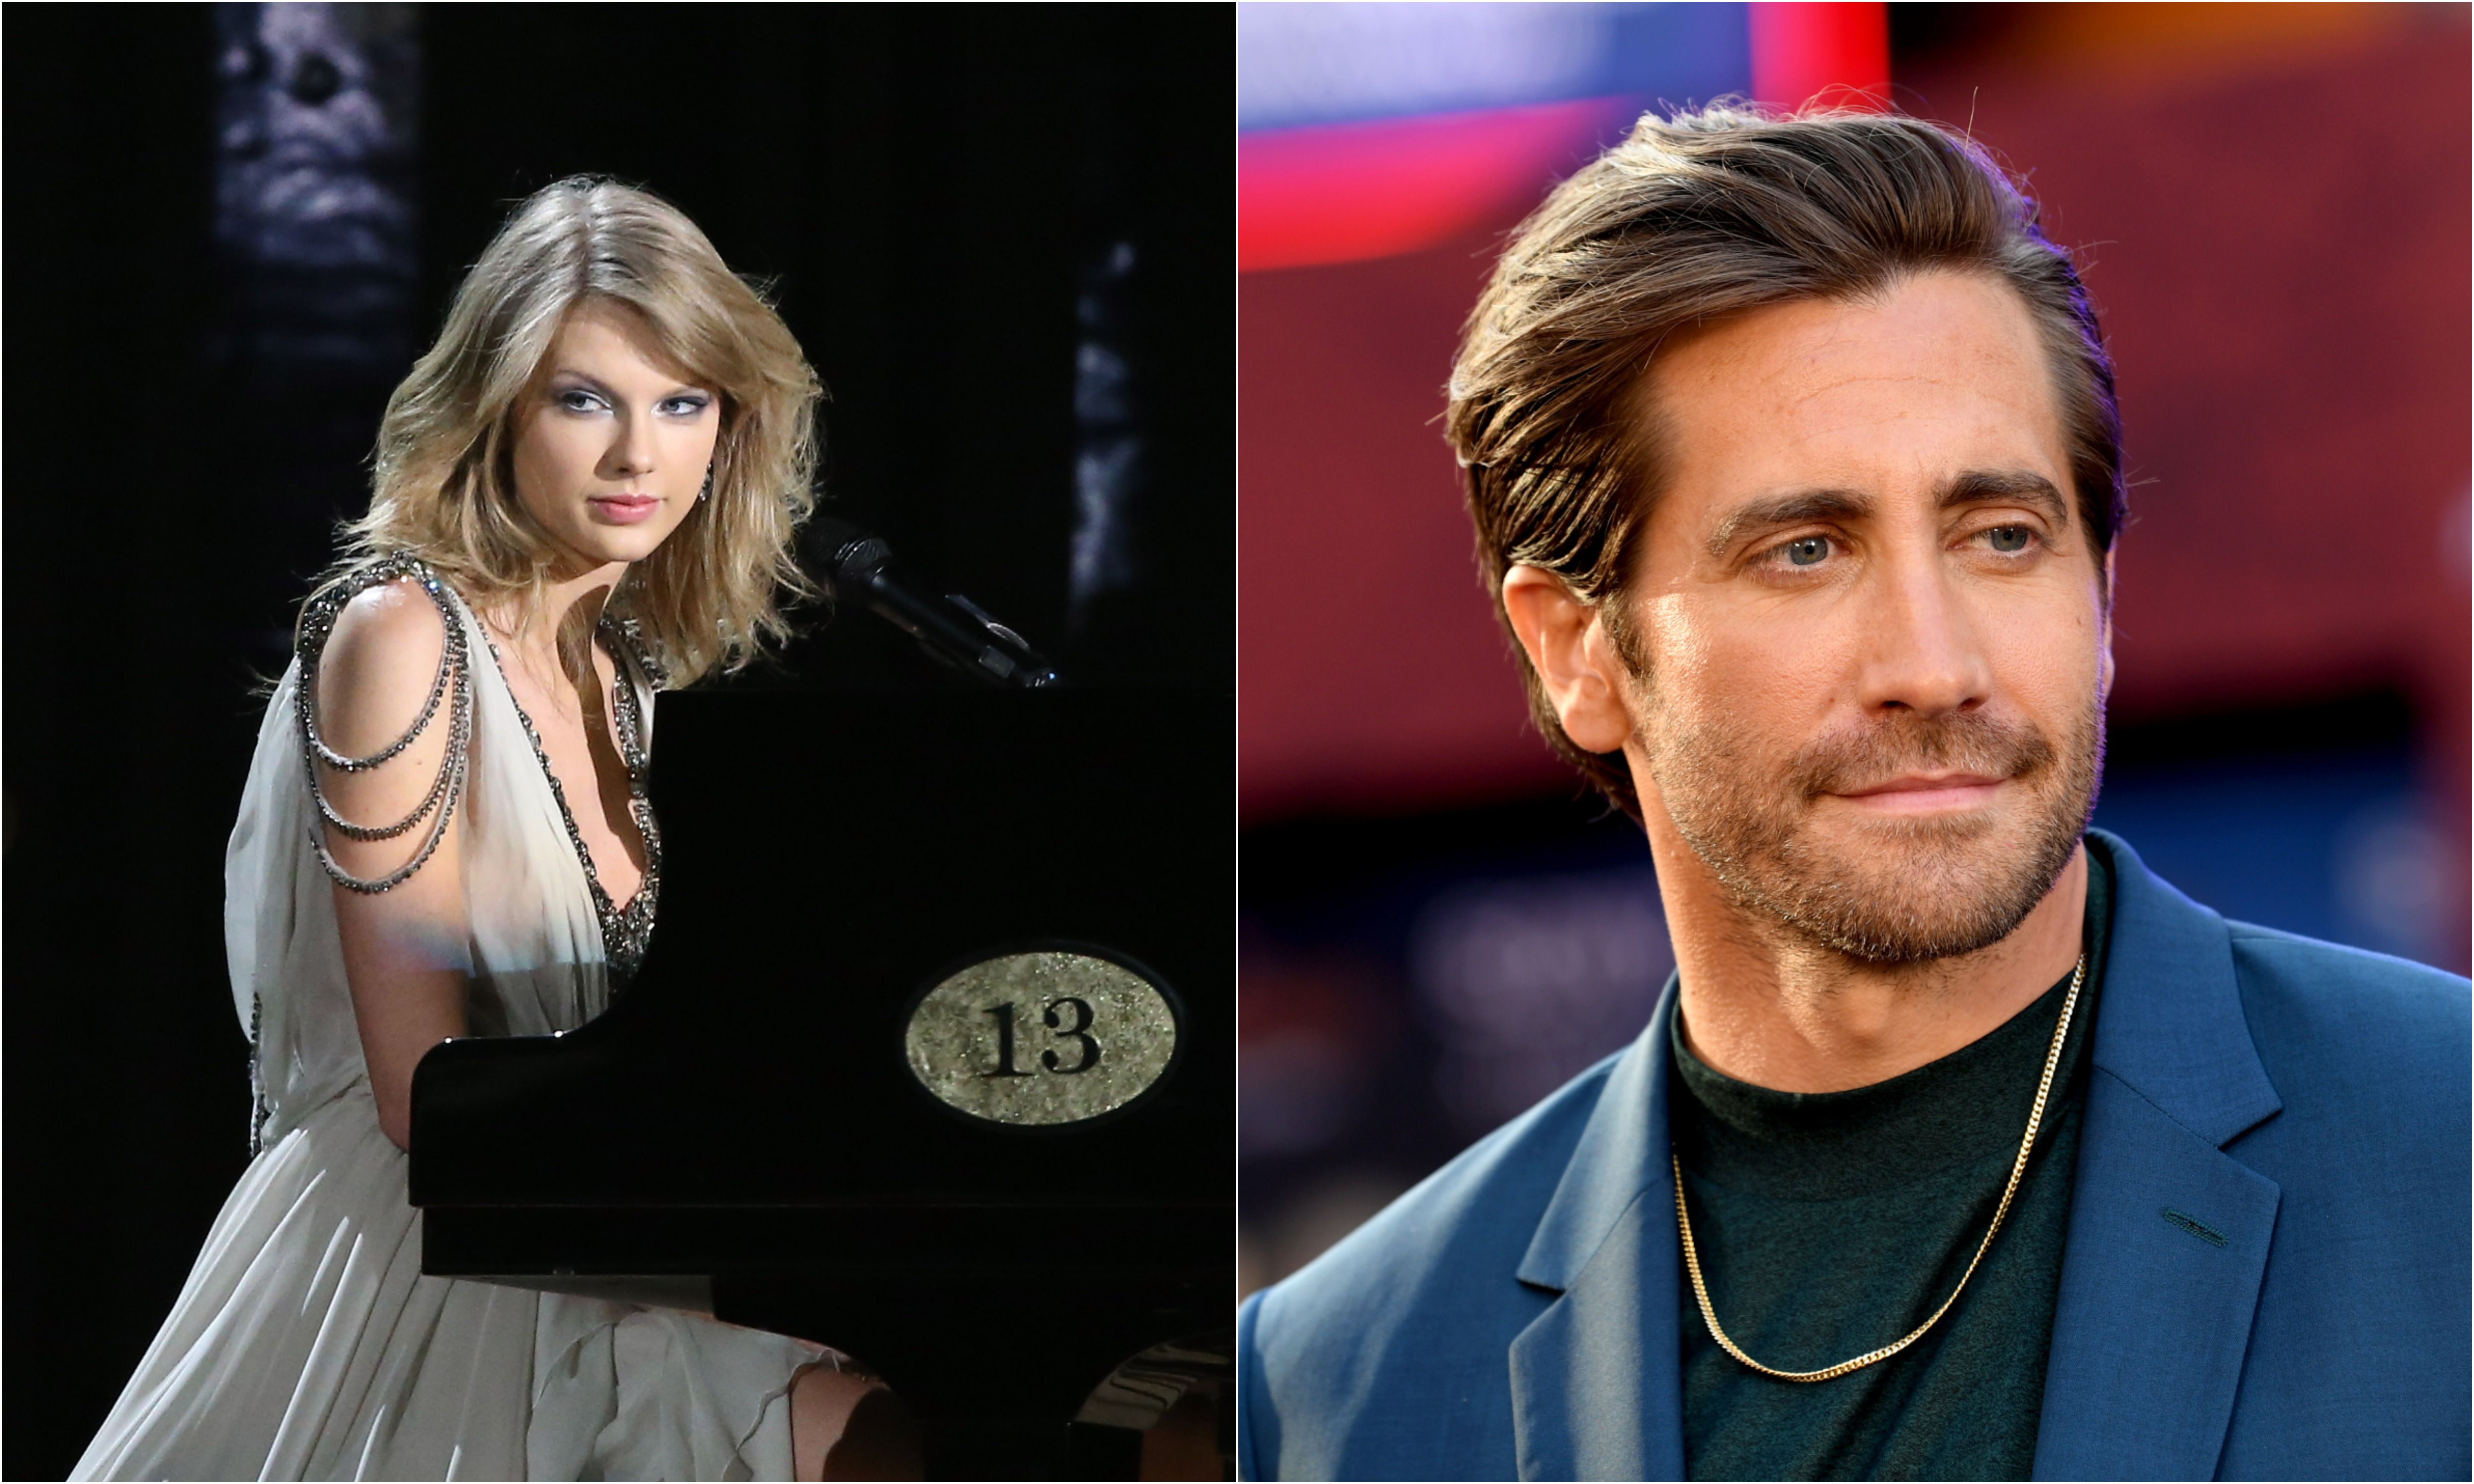 Taylor Swift performing at the 2014 Grammy Awards and Jake Gyllenhaal at the 'Spider-Man: Far From Home' premiere